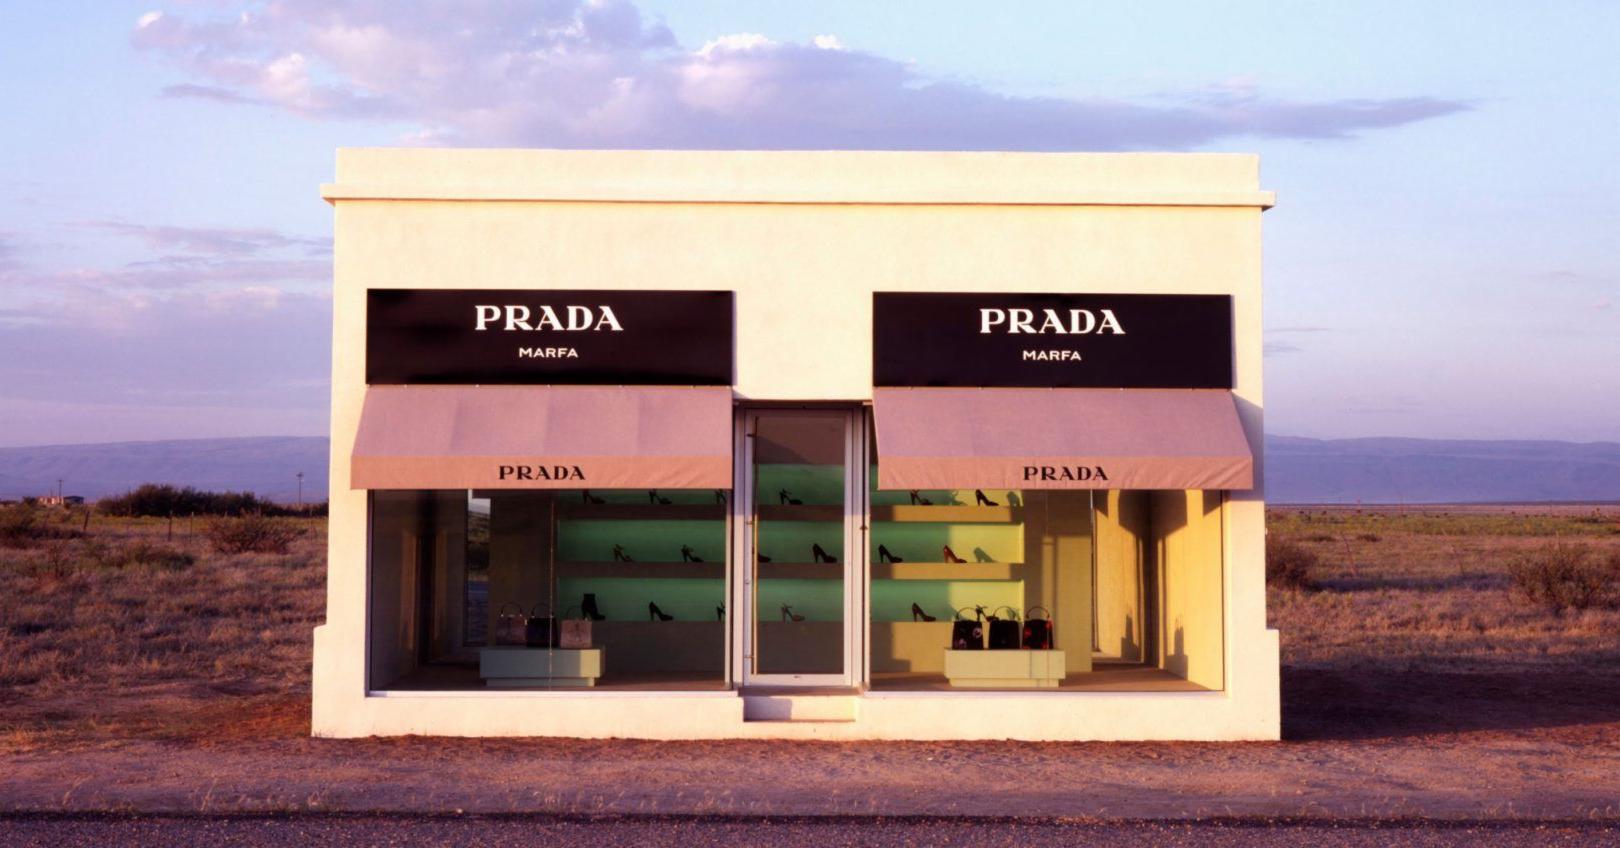 From Prada to Hermès, 5 Examples of High Fashion Brands in Works of Art -  Galerie